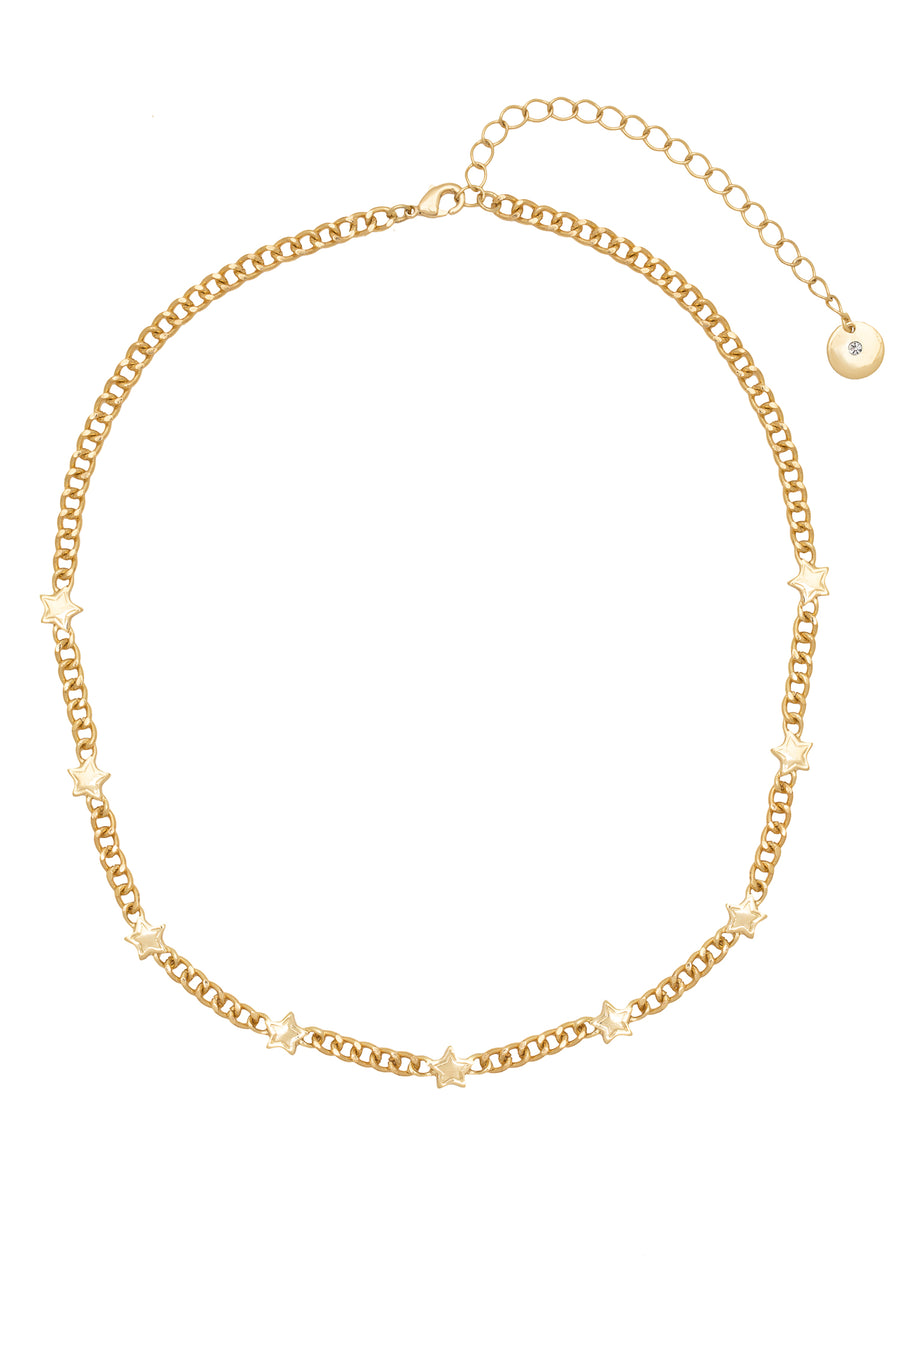 Gold 'Starburst' Chunky Chain Necklace